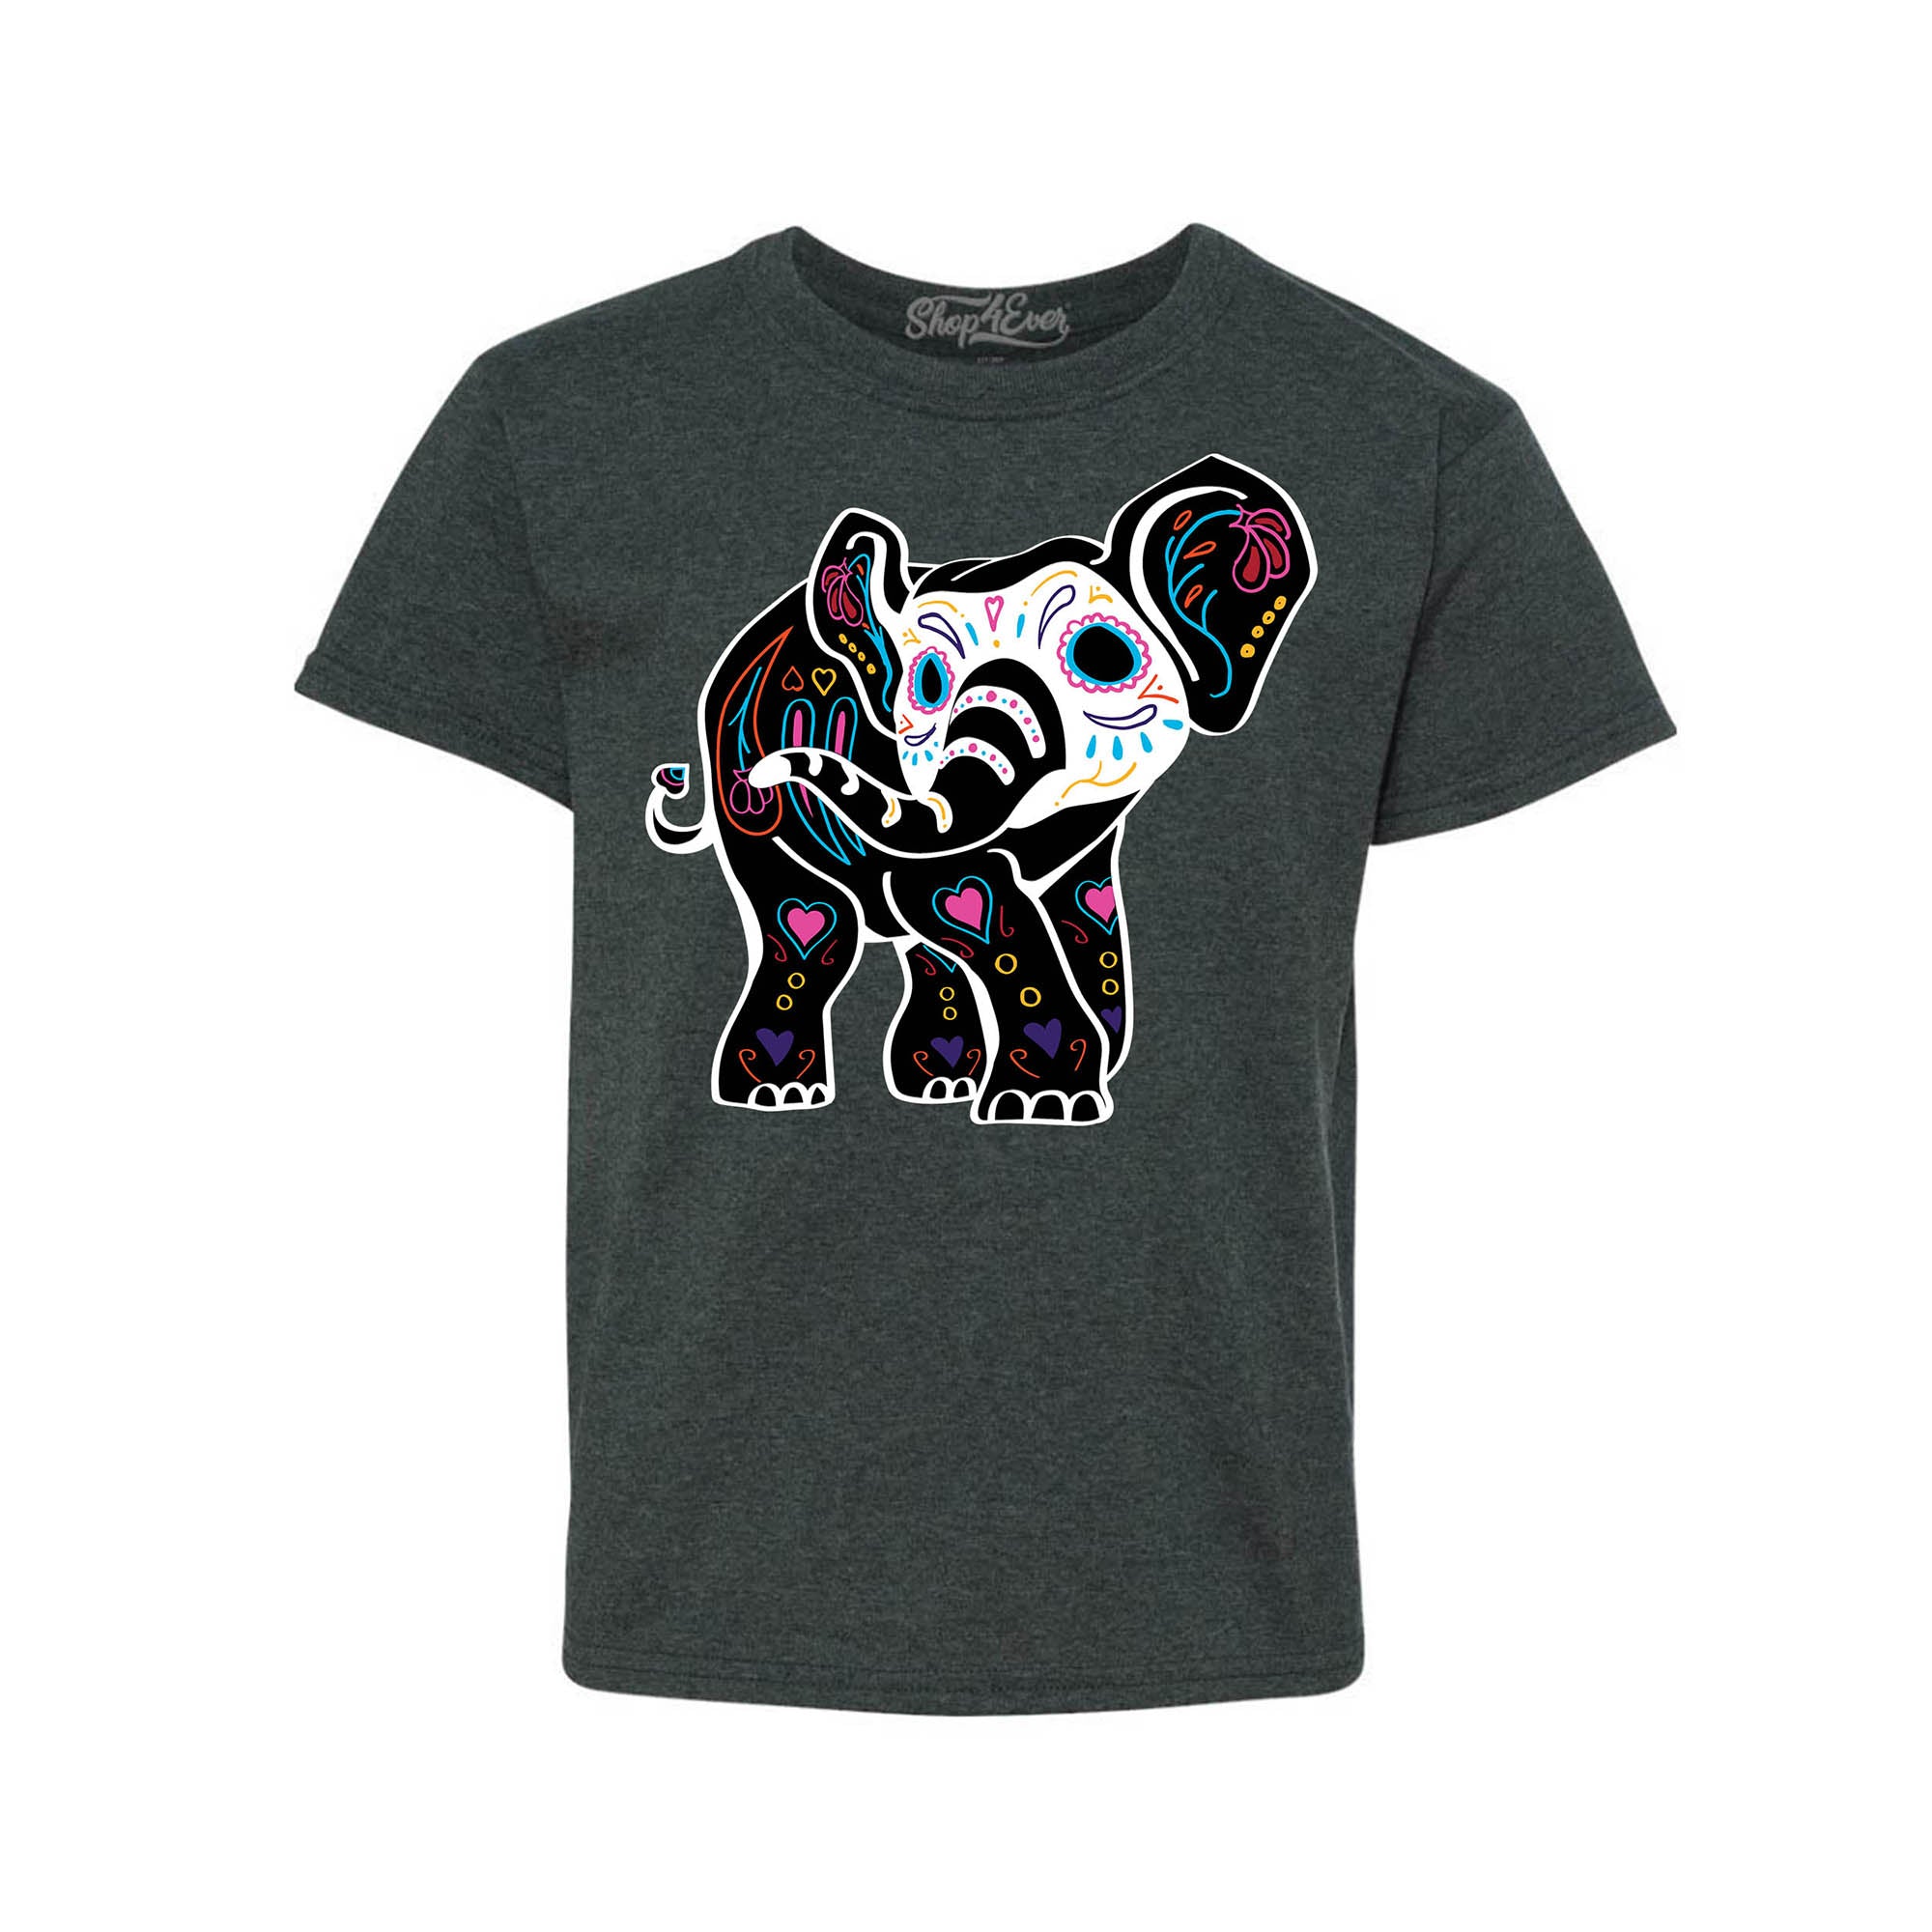 Day of The Dead Skull Child's Tee Sugar Elephant Youth's T-Shirt